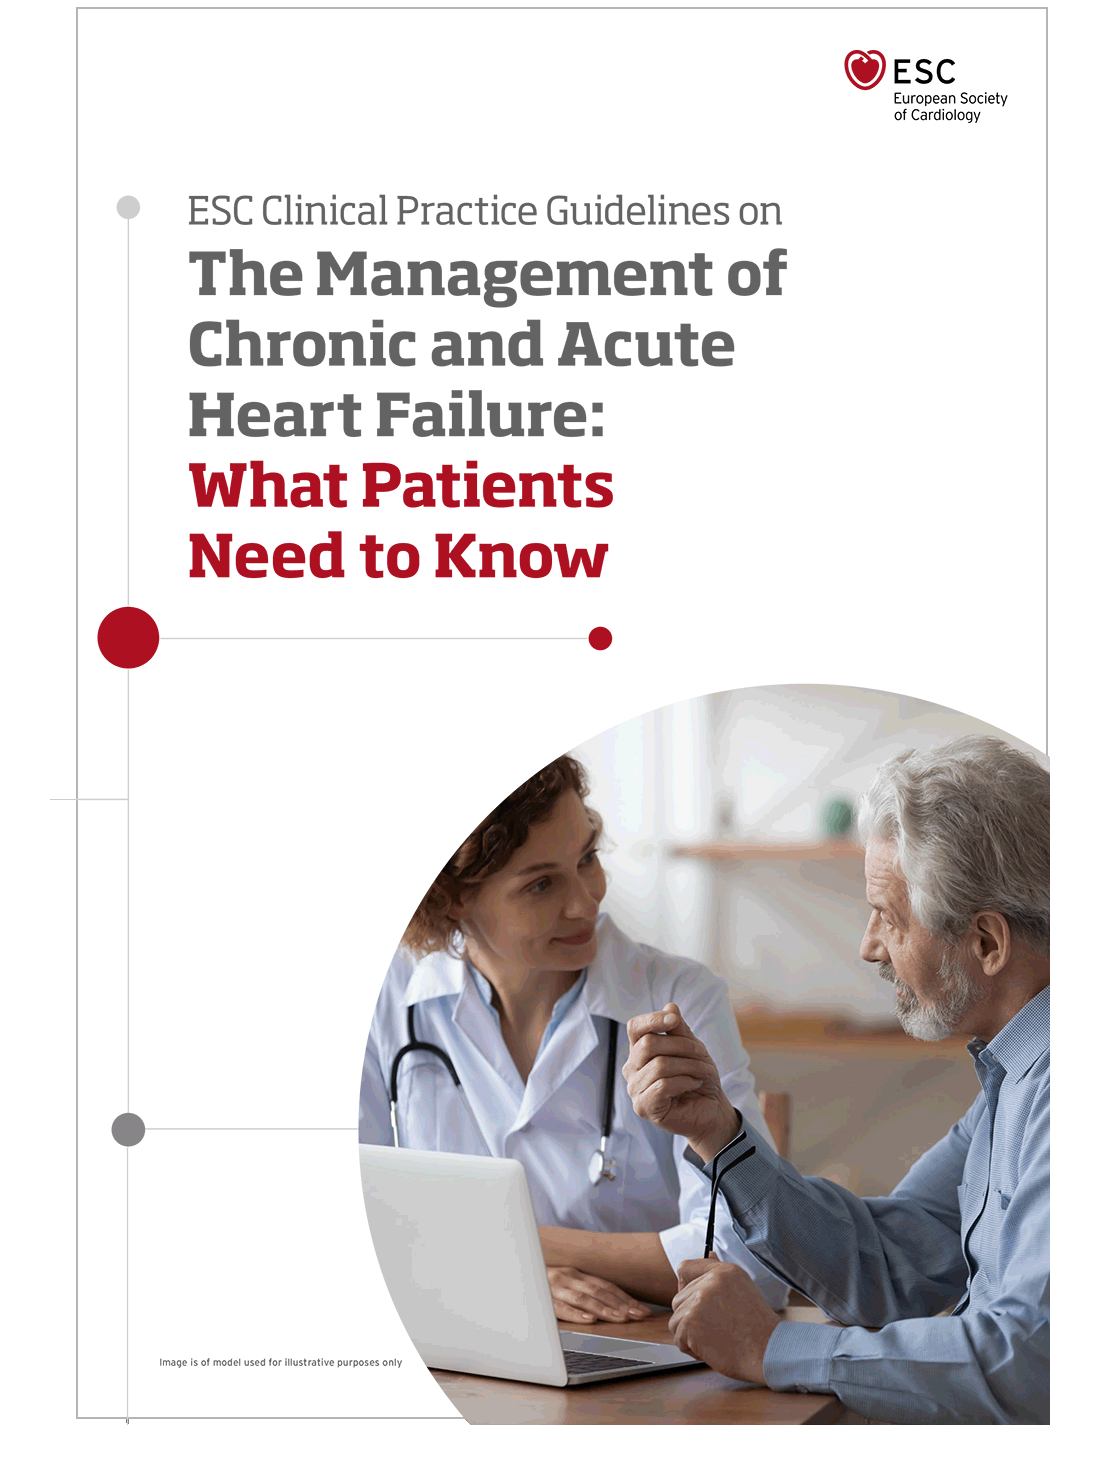 ESC Clinical Practice Guidelines on The Management of Chronic and Acute Heart Failure